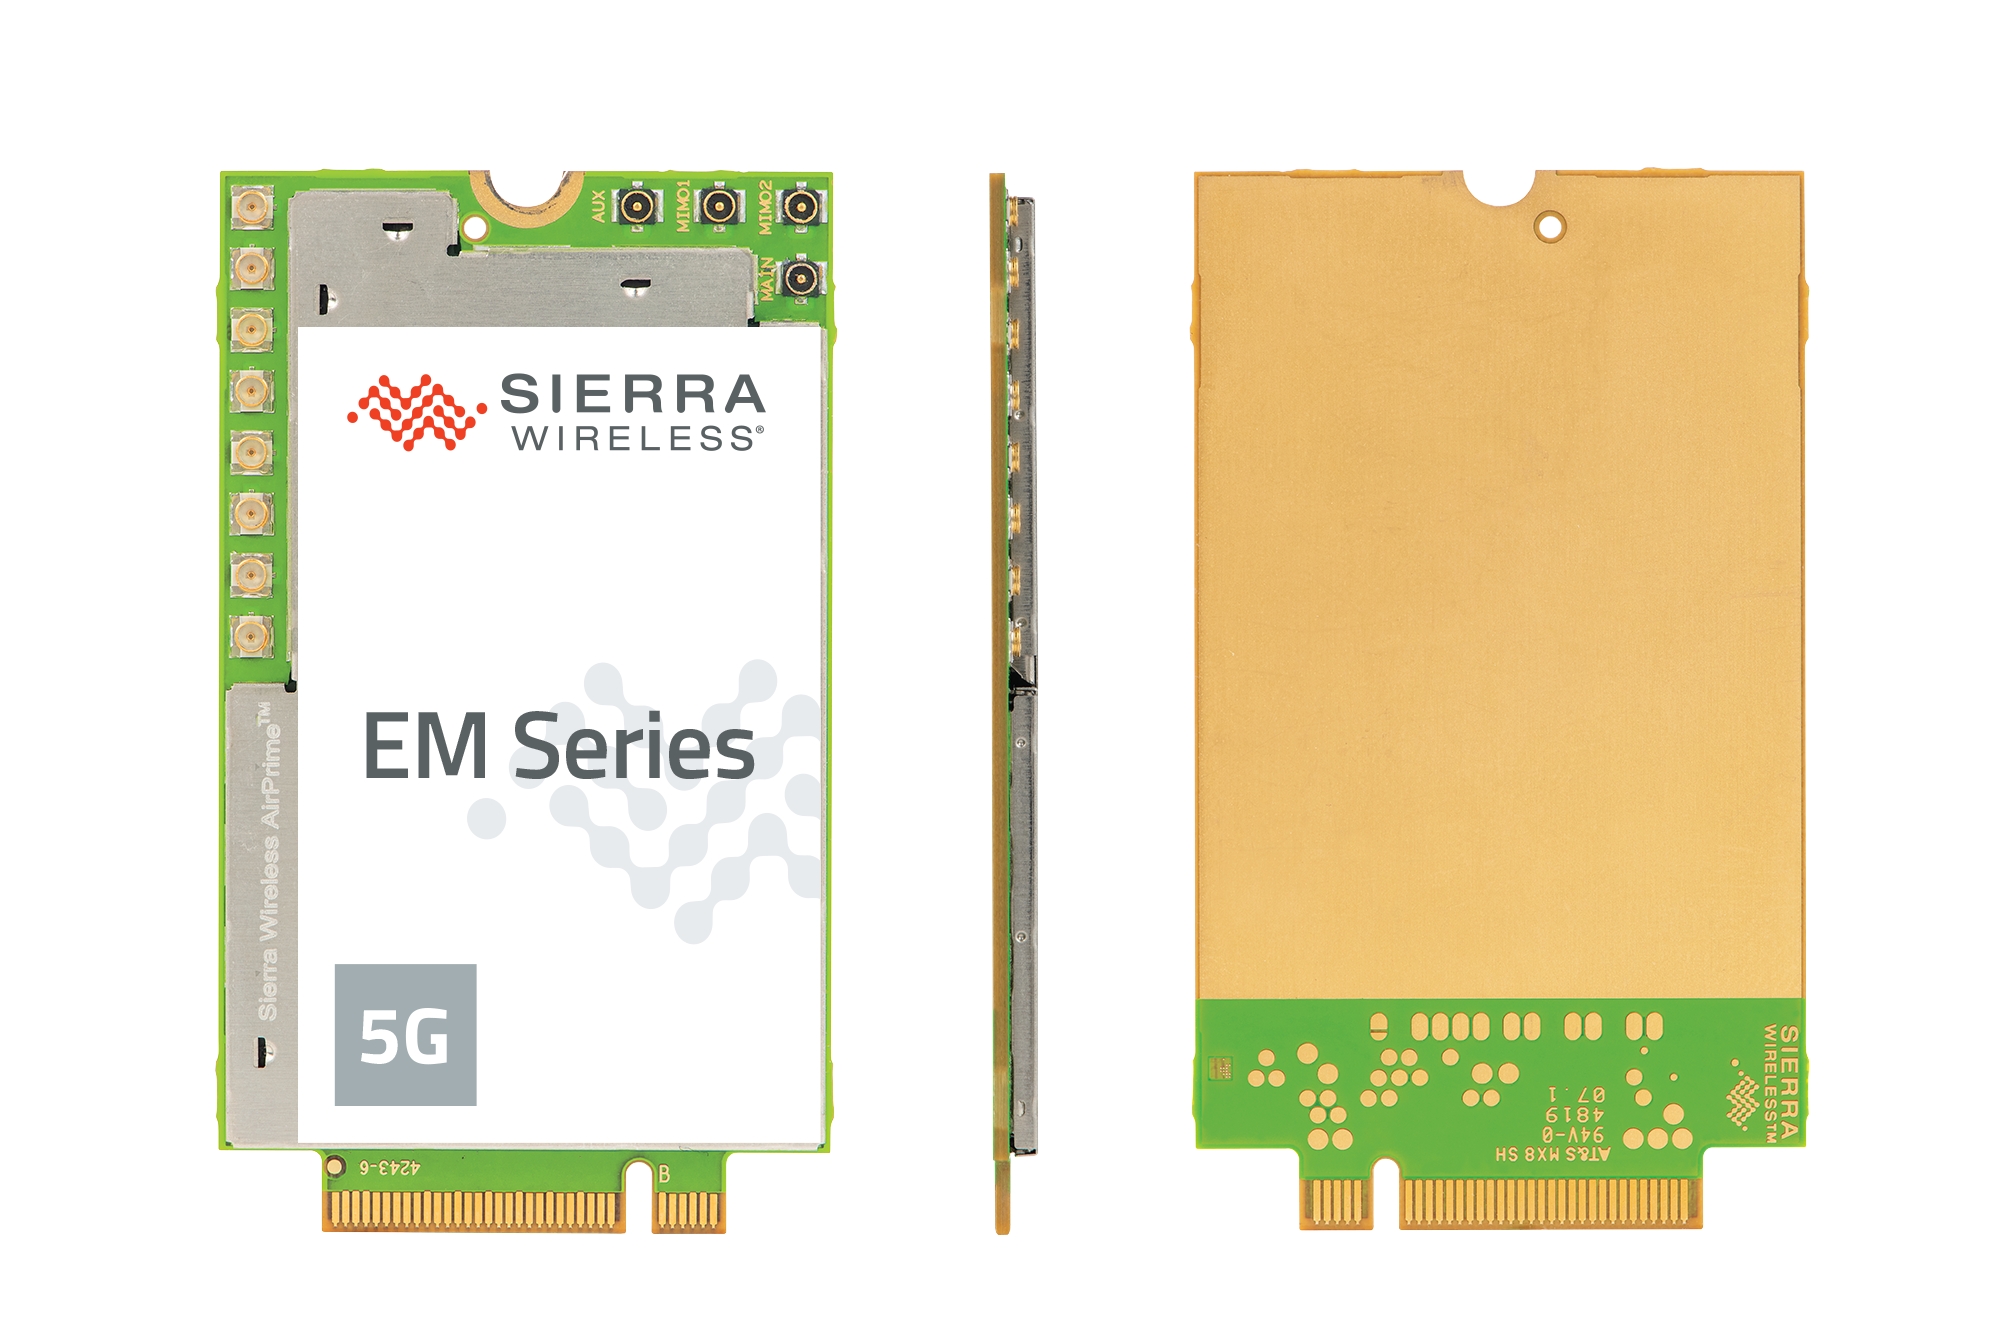 Sierra Wireless Announces Commercial Availability of 5G Module